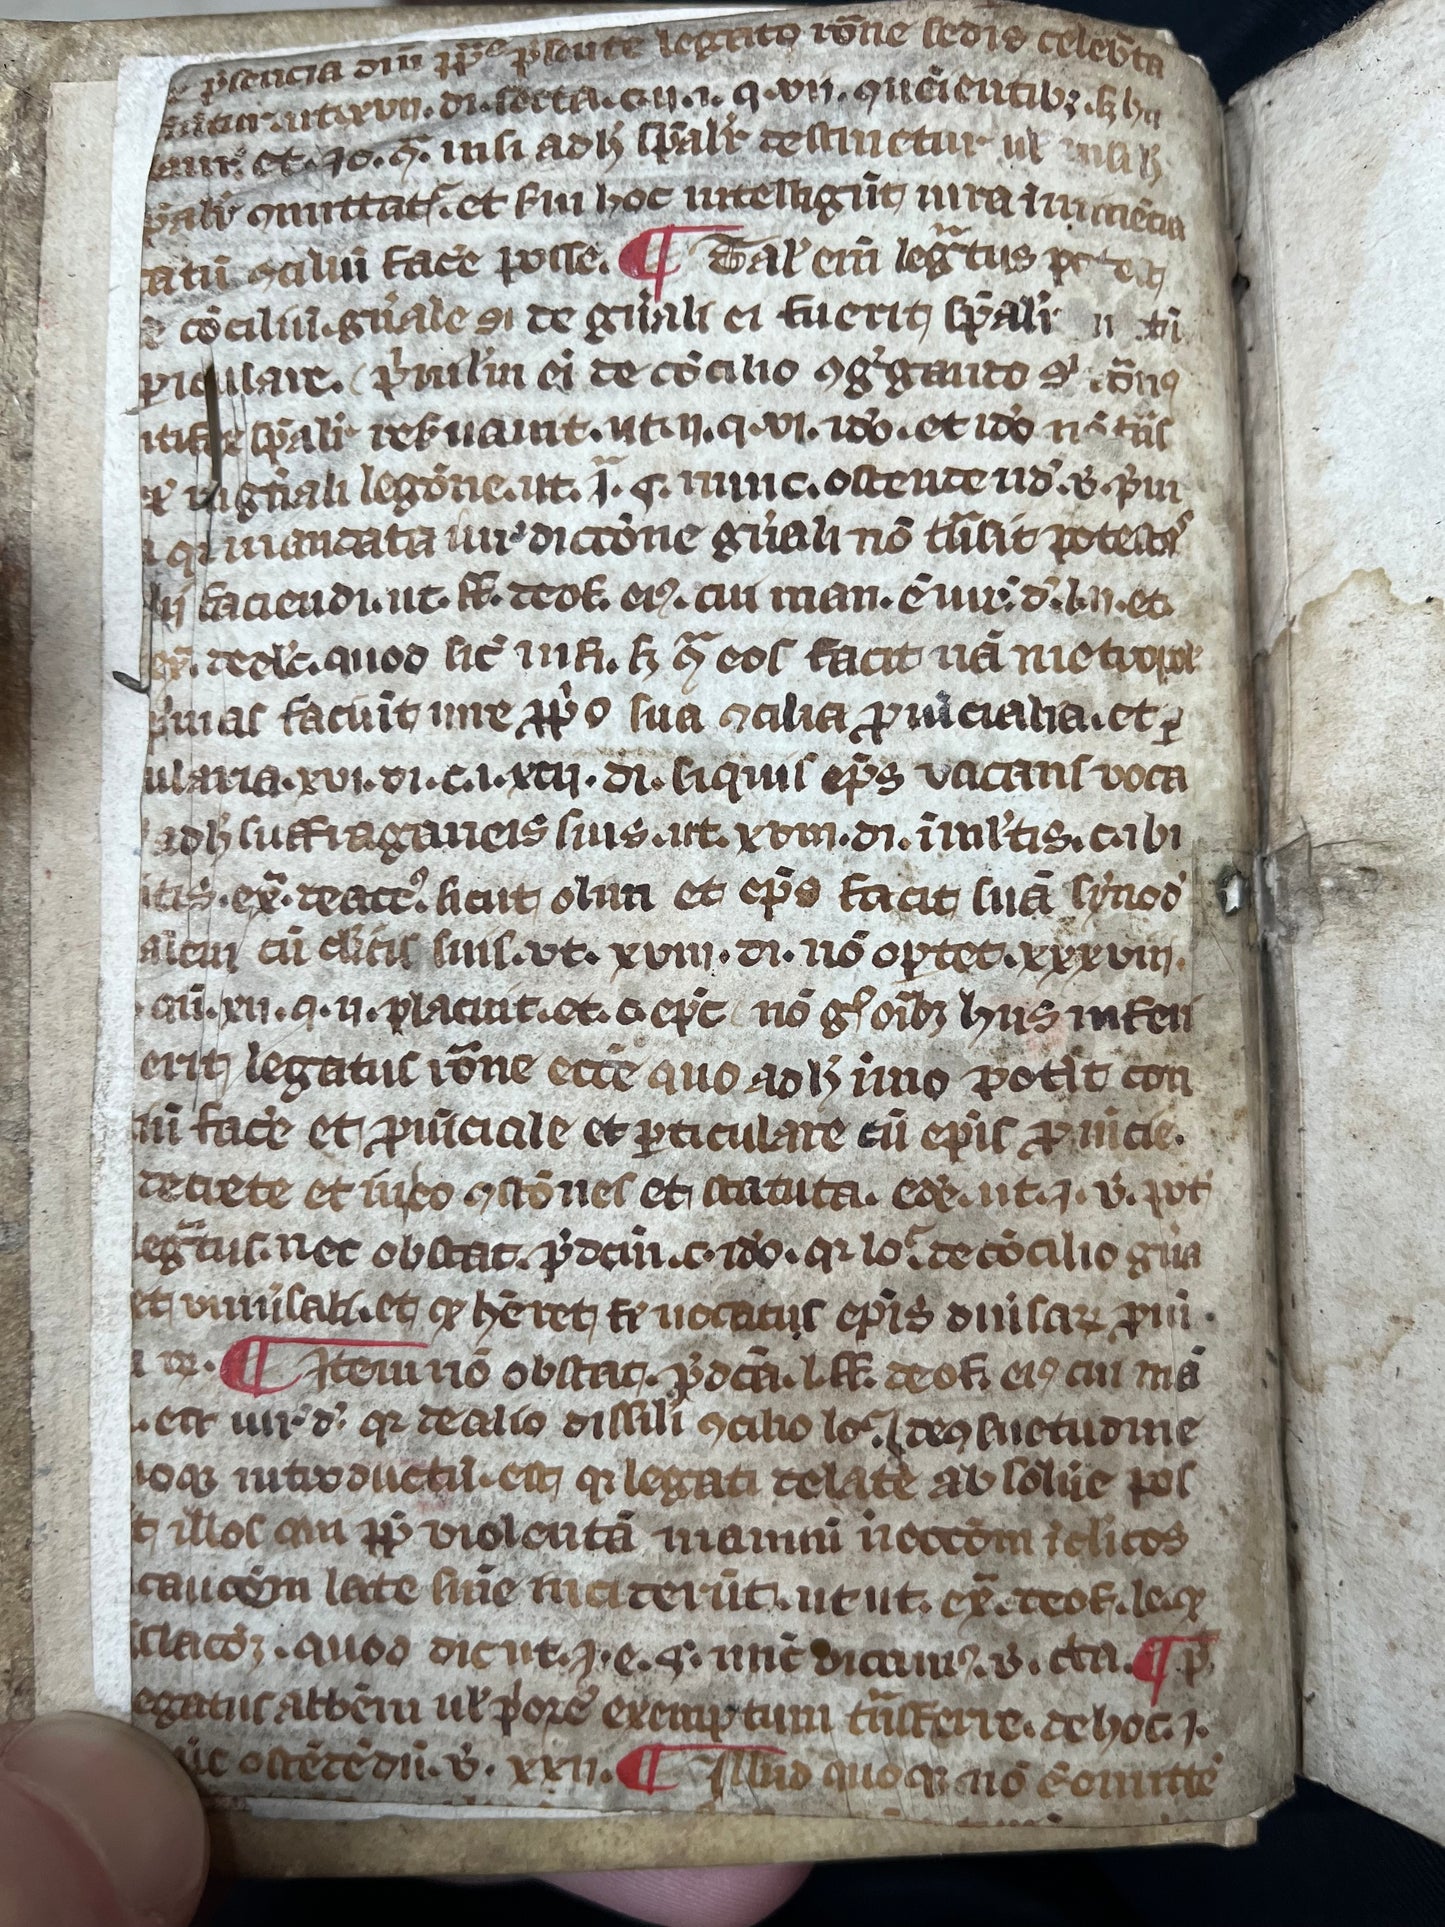 Pastoralis cure liber - 1516 - with 14th Century manuscript fly leaves